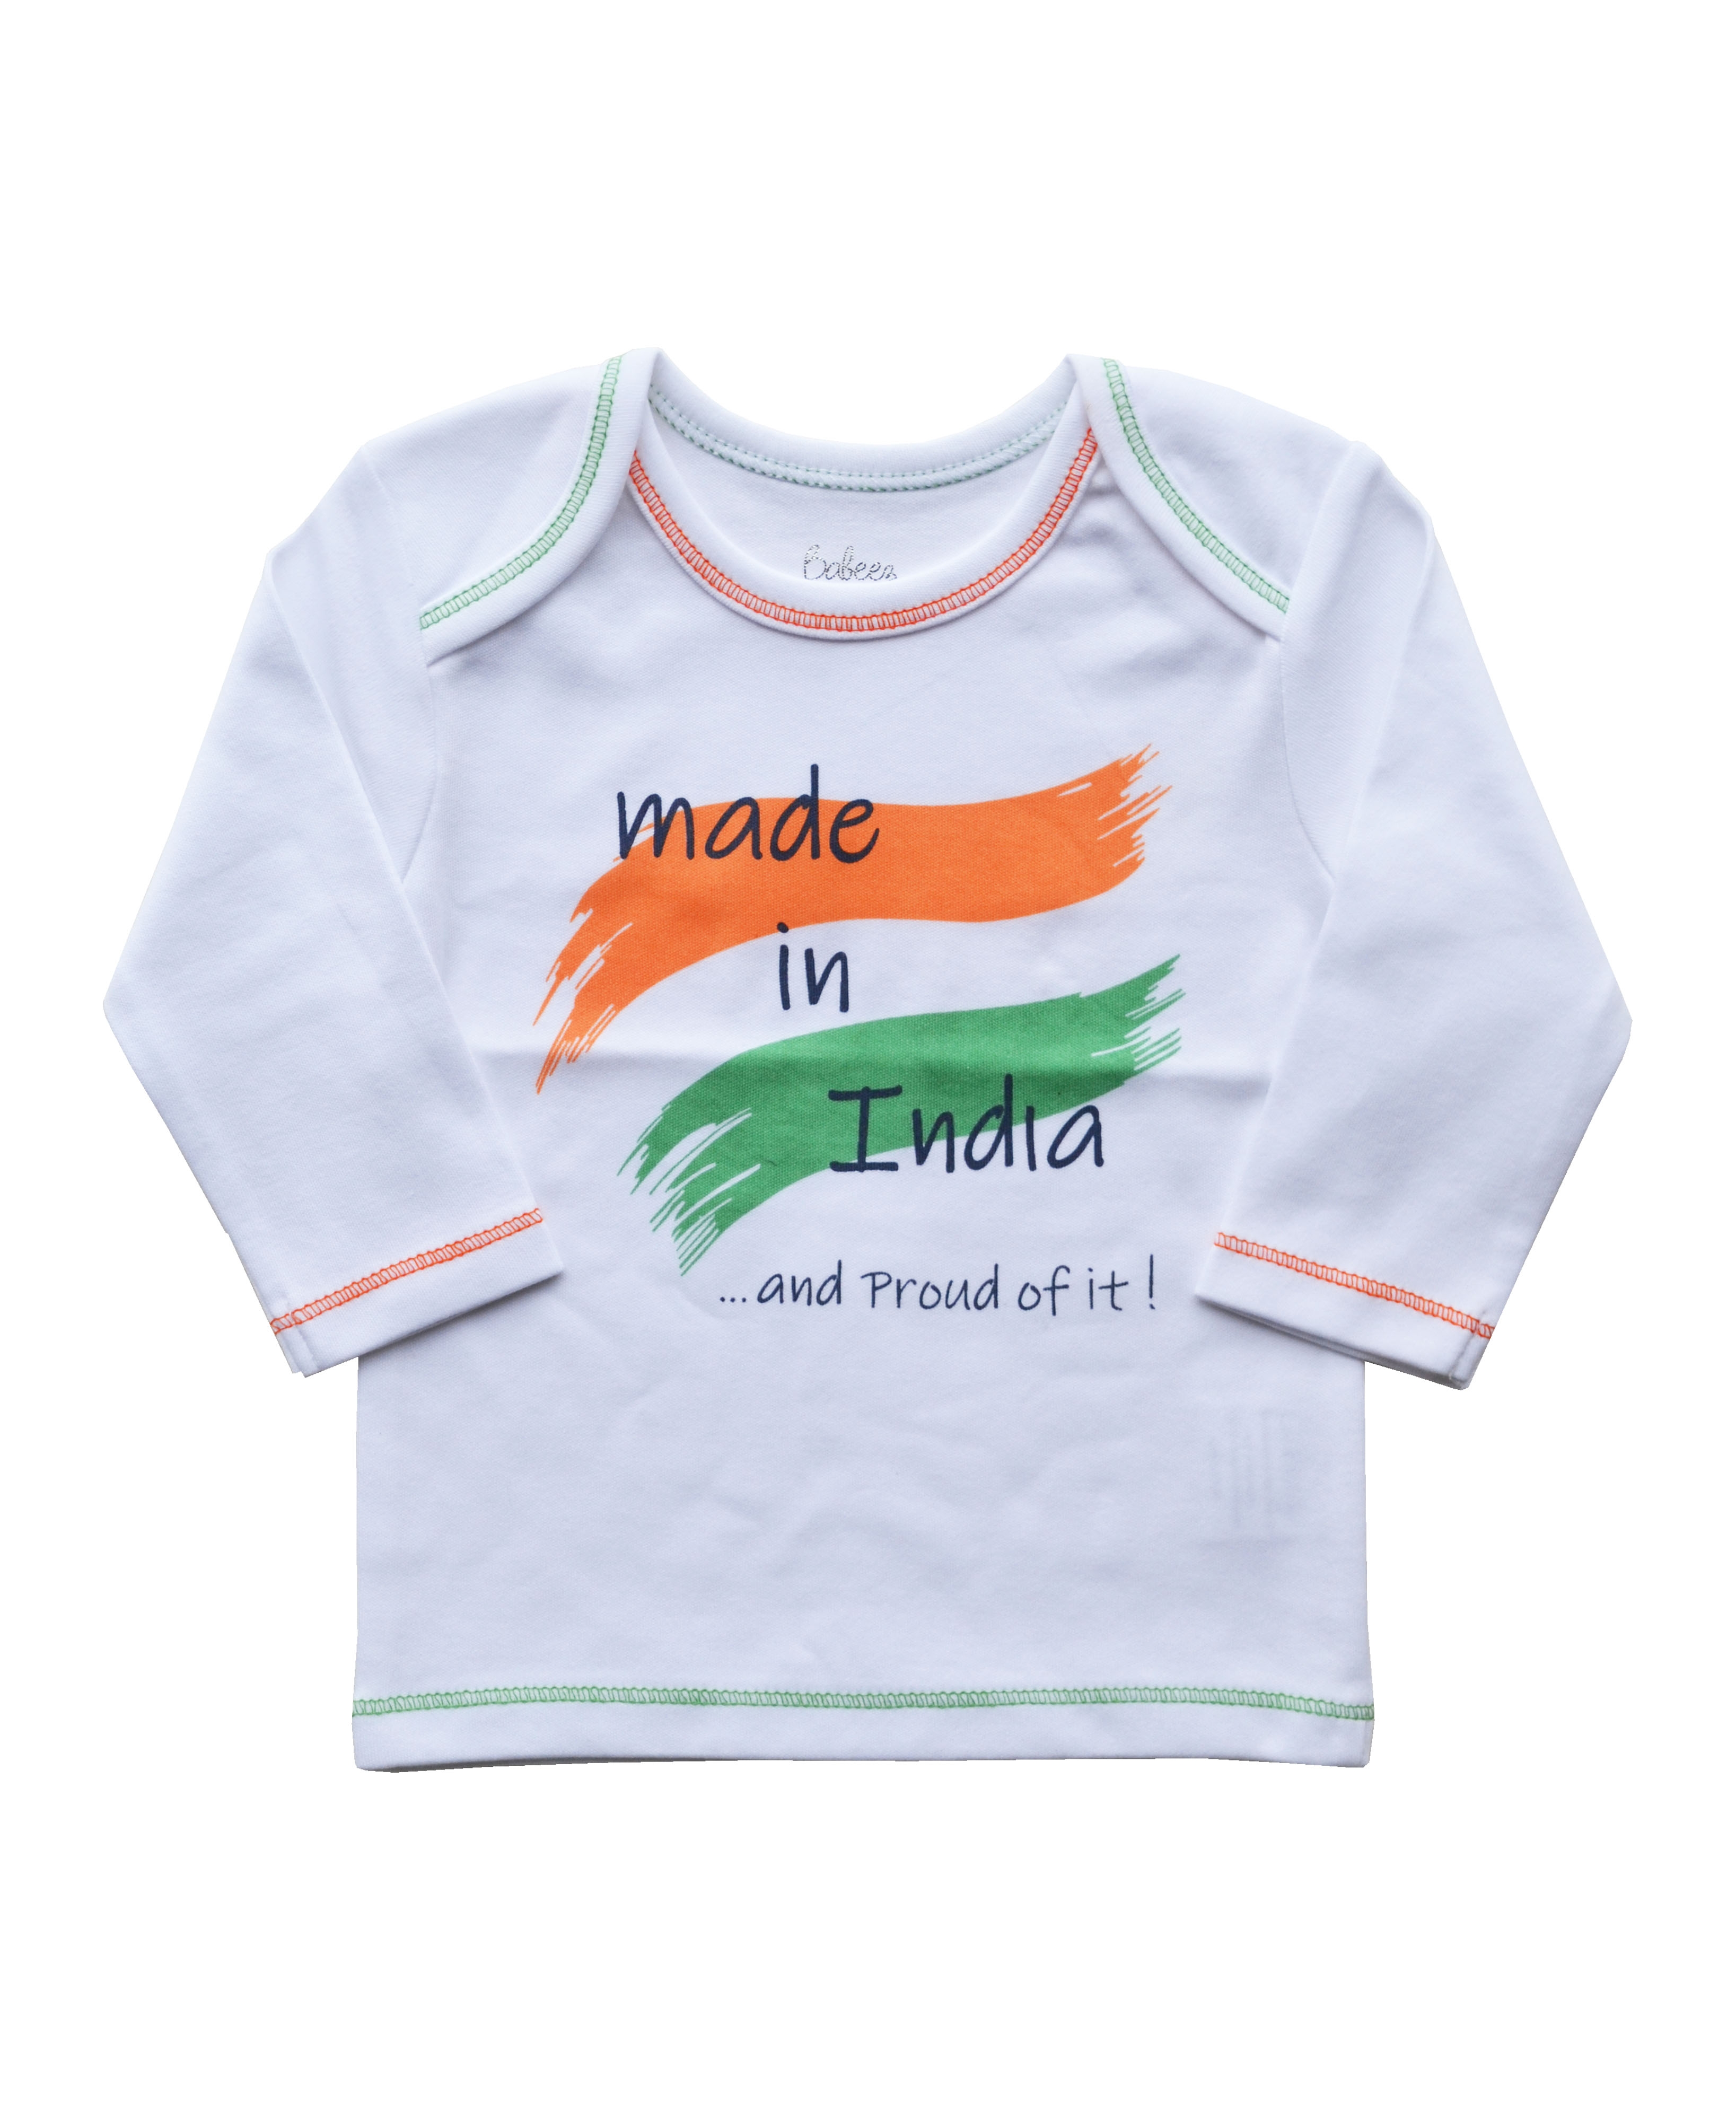 Babeez | White T-Shirt with Made in India Print (100% Cotton Interlock) undefined